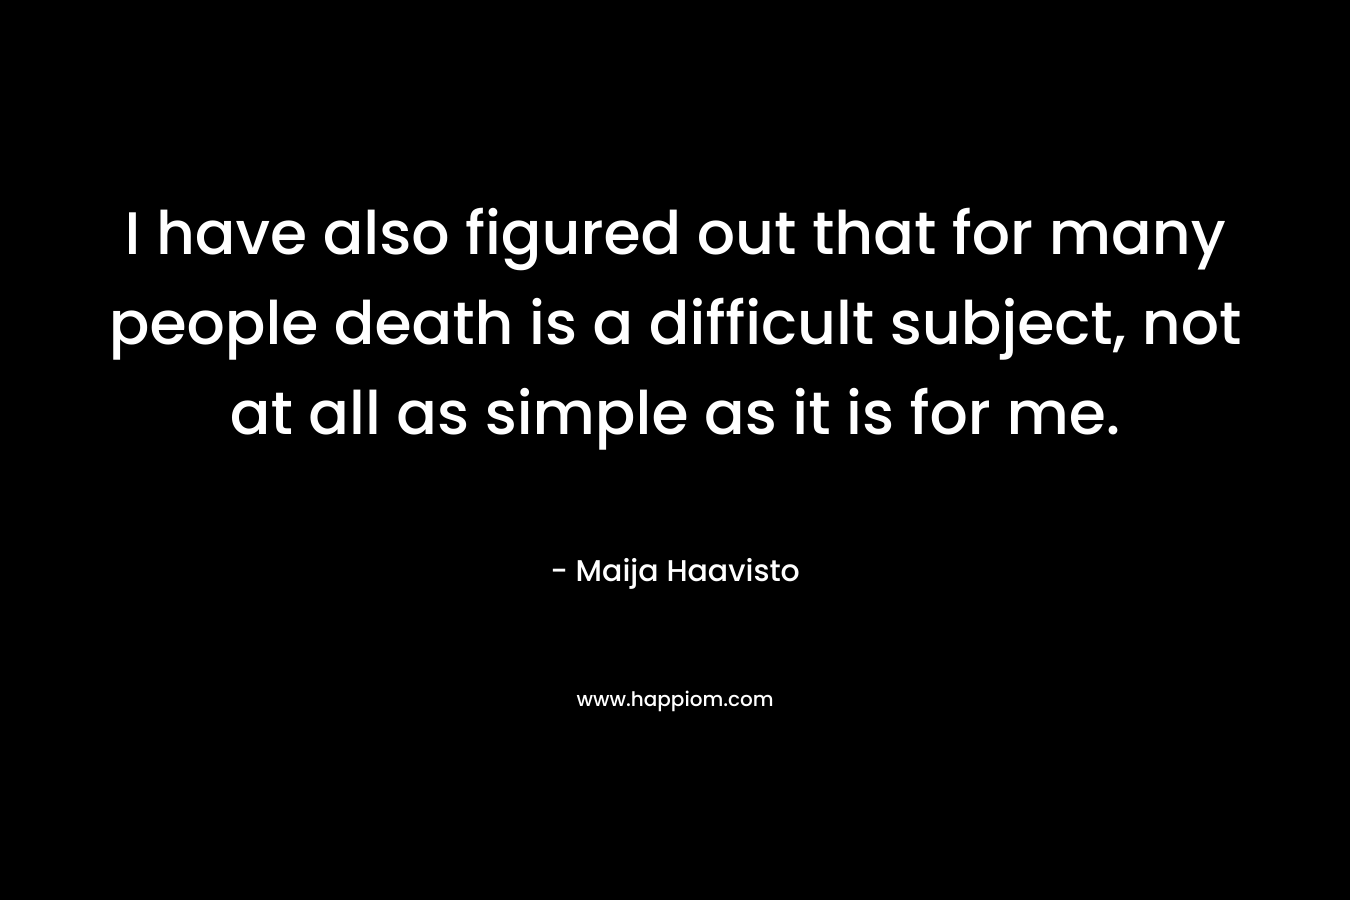 I have also figured out that for many people death is a difficult subject, not at all as simple as it is for me. – Maija Haavisto